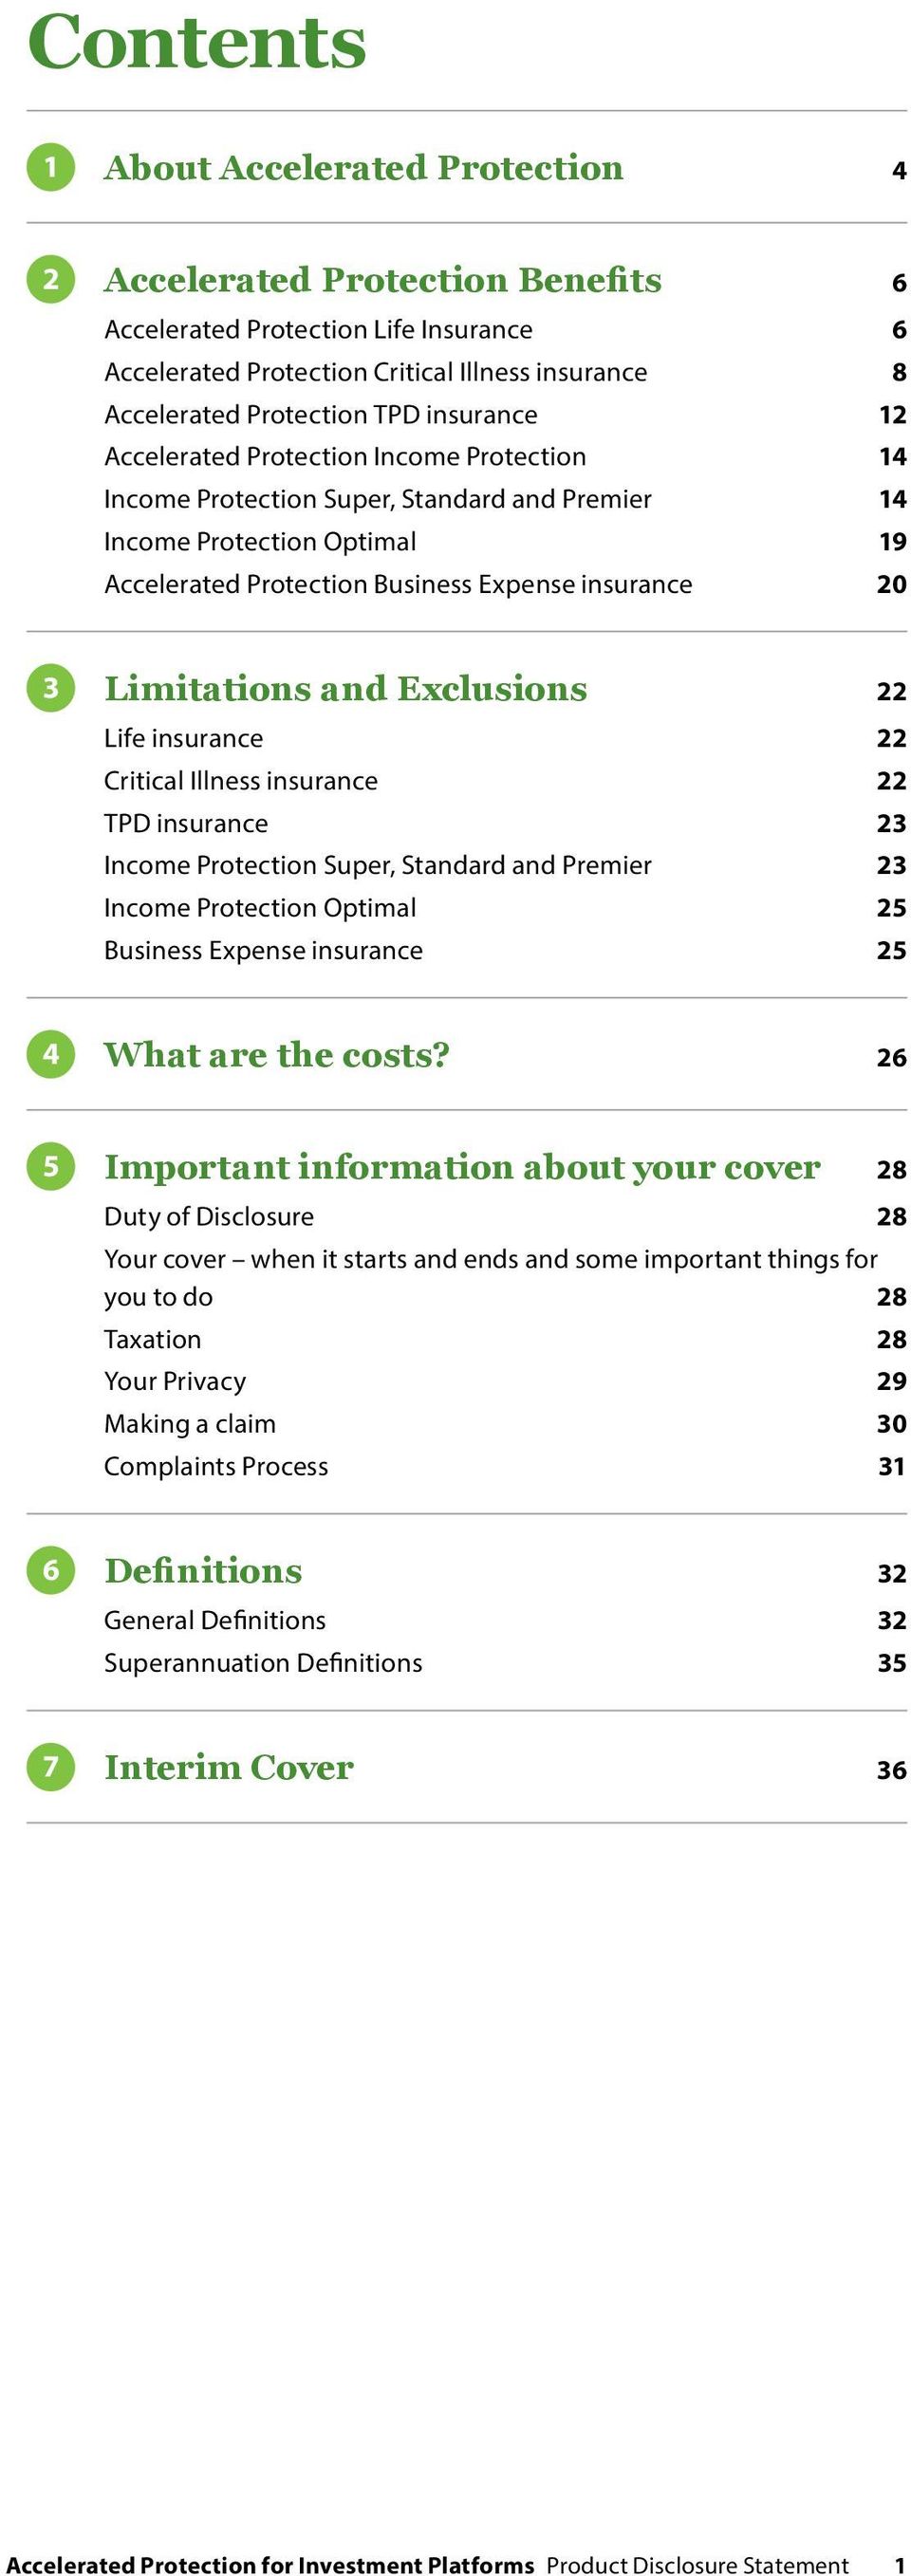 Exclusions 22 Life insurance 22 Critical Illness insurance 22 TPD insurance 23 Income Protection Super, Standard and Premier 23 Income Protection Optimal 25 Business Expense insurance 25 4 What are